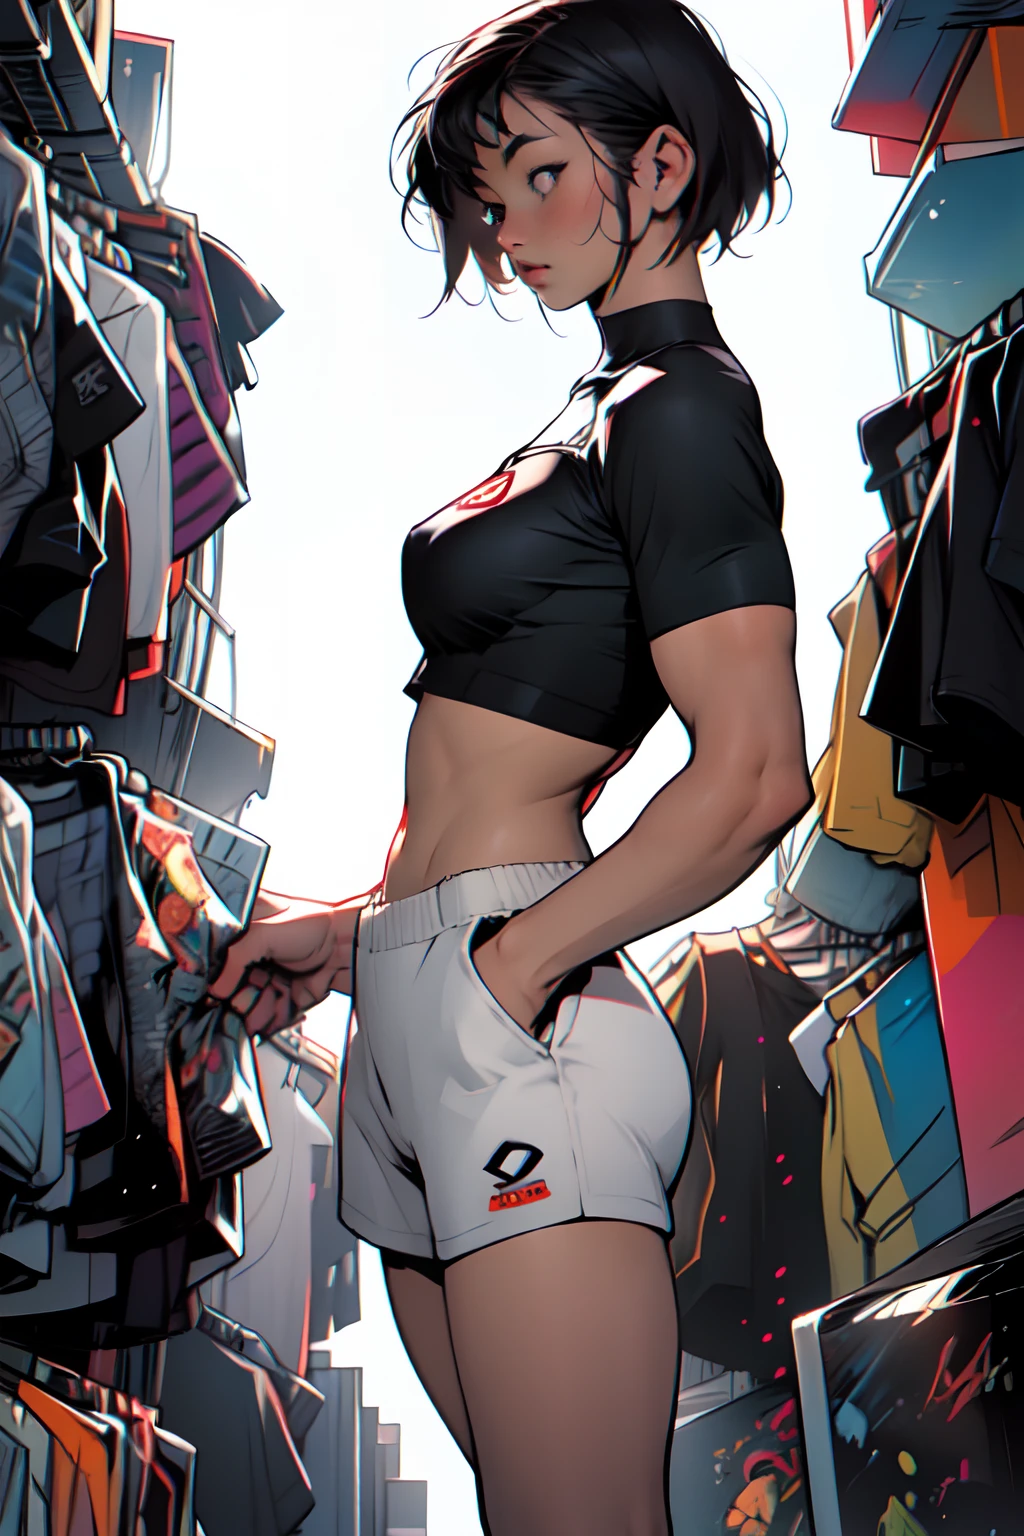 Masterpiece, best quality, high-res, extremely detailed, 1 girl 18 years old lookig very cute, in shape, fitness, (model, anorexic:1.1, very slender:0.9), female focus, woman, tomboy, marimacho, image comics style, comic book cover, (simple color background)